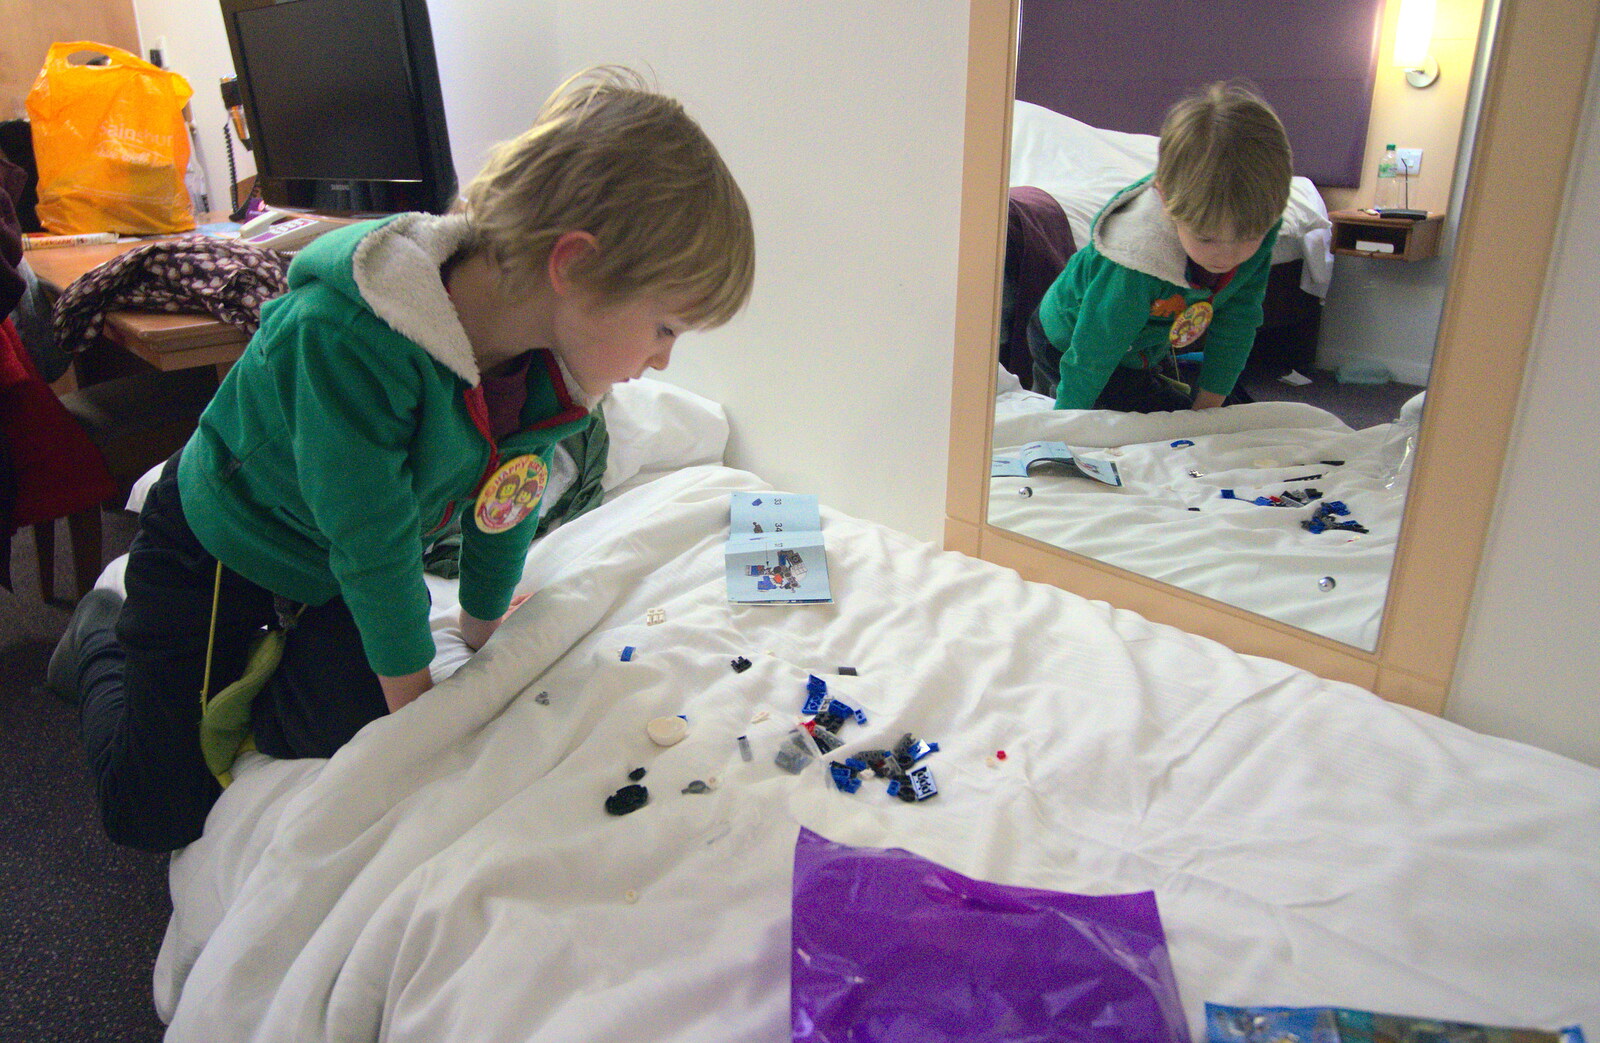 Harry makes yet more Lego from A Trip to Legoland, Windsor, Berkshire - 25th March 2017